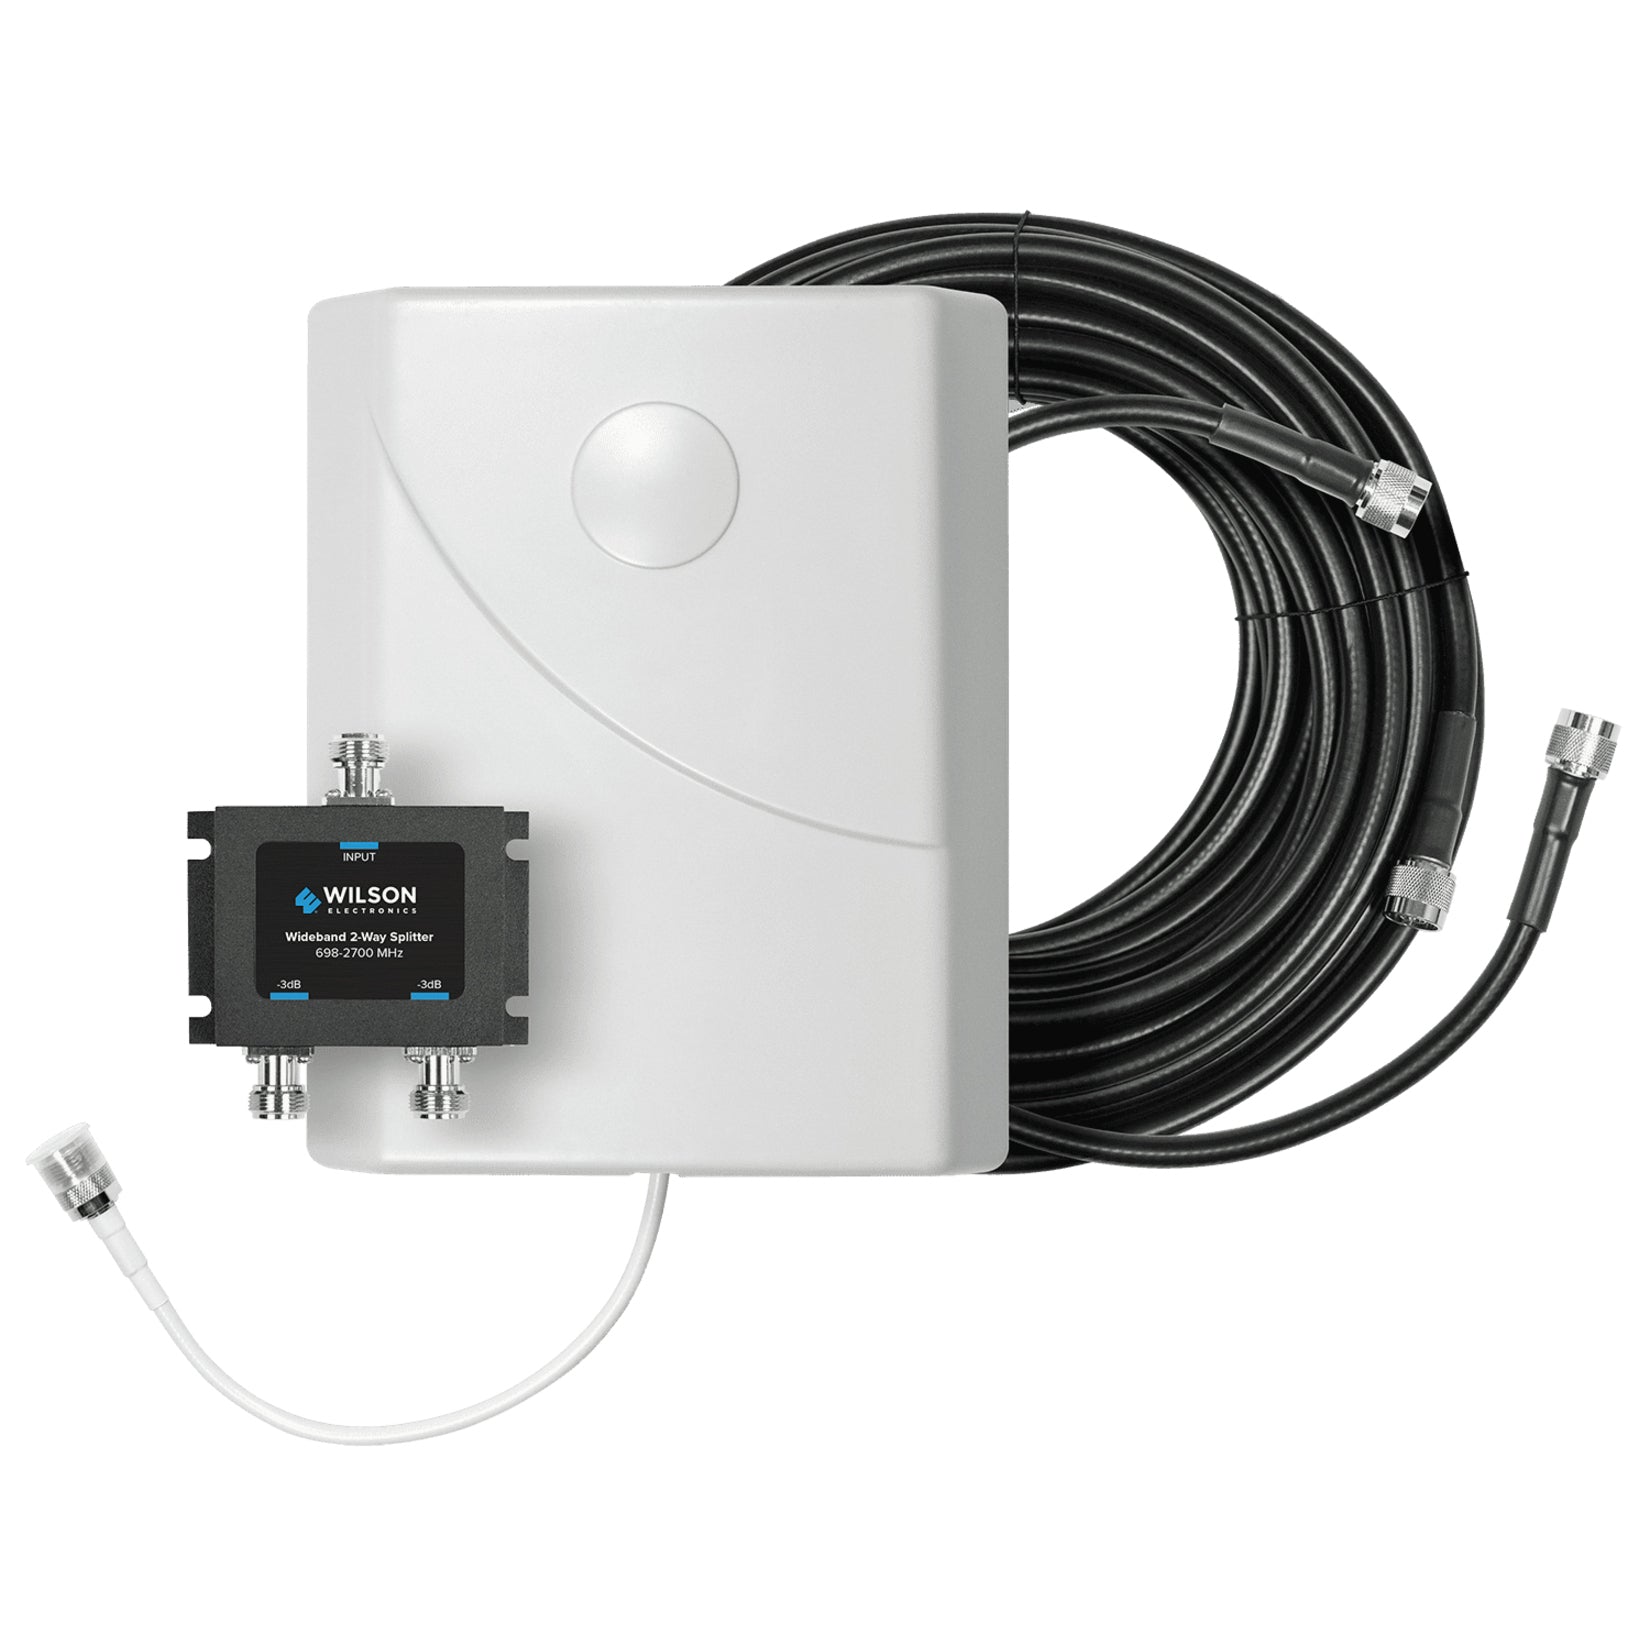 Wilson 309906-50N Single Antenna Expansion Kit 50 Ohm - Improve Signal Strength and Coverage in Your Home or Office